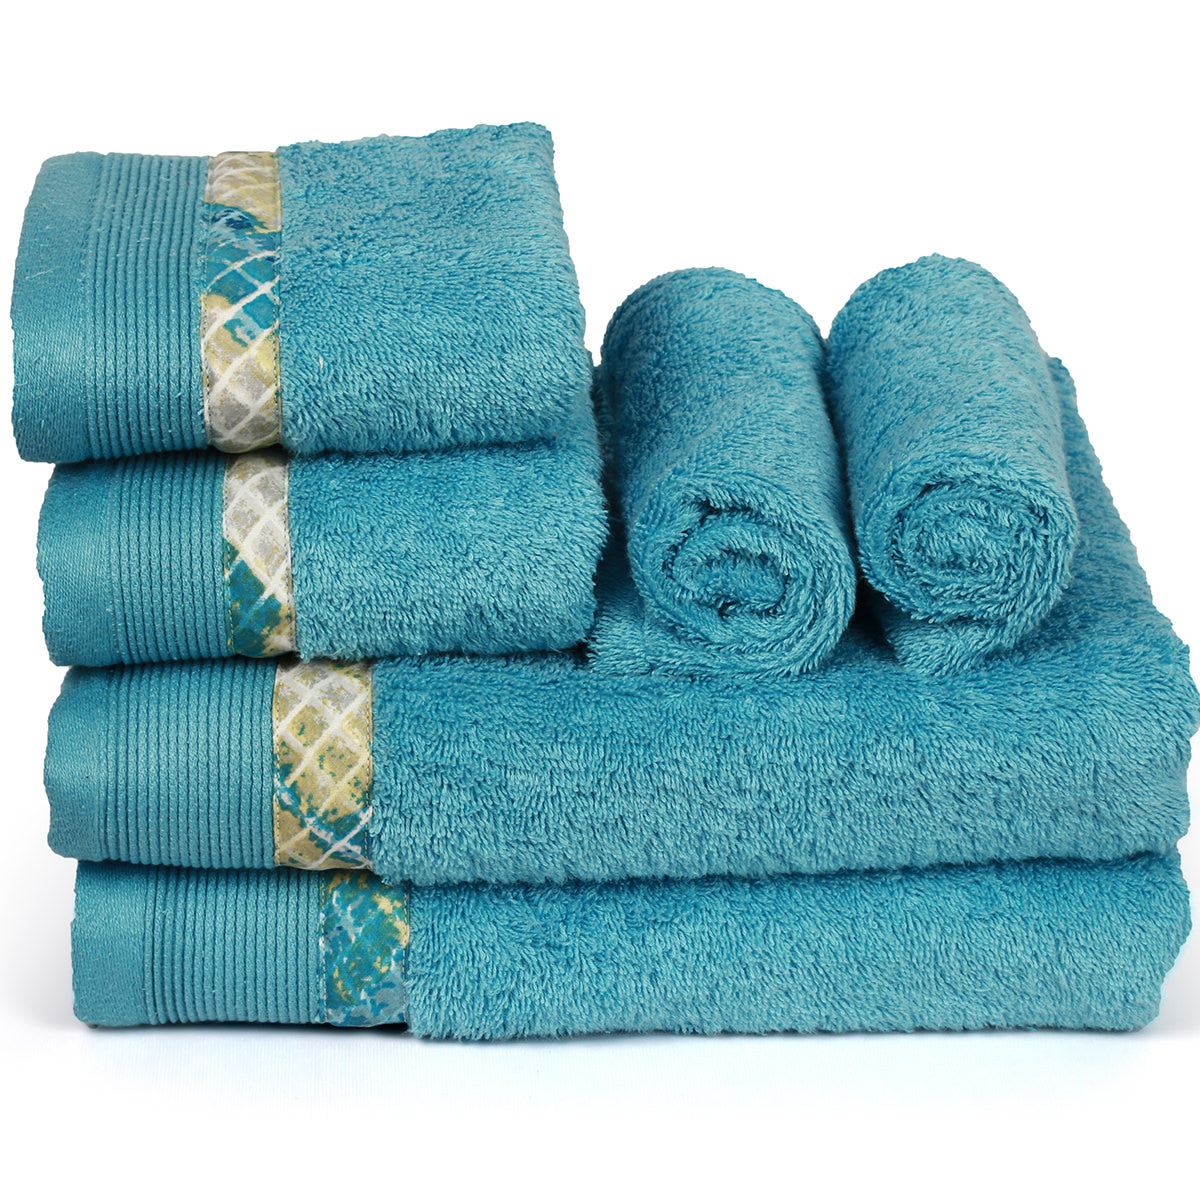 Mad for Plaid Foggy Surf Antimicrobial Antifungal Super Absorbent & Soft Blue Towel Set